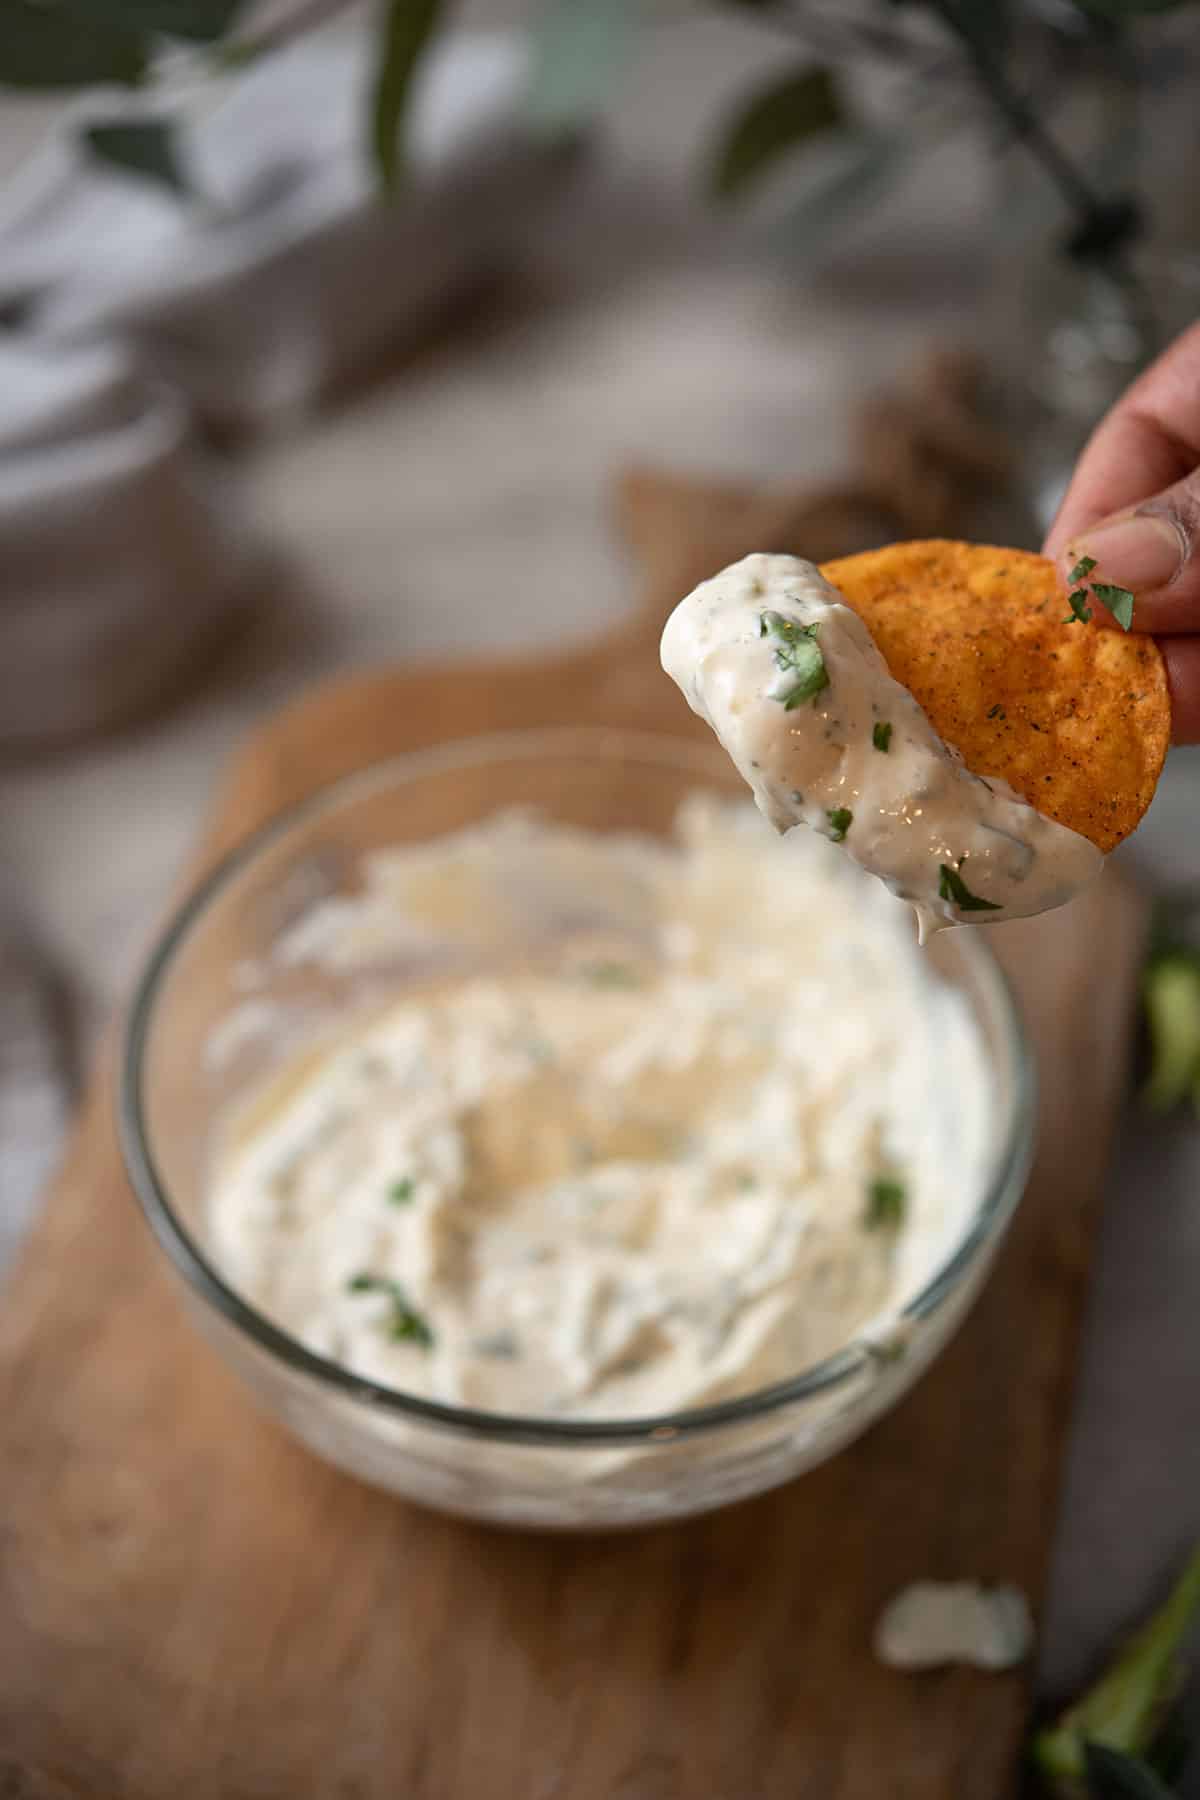 jalapeno mayo dip is shown with a cracker in fingers